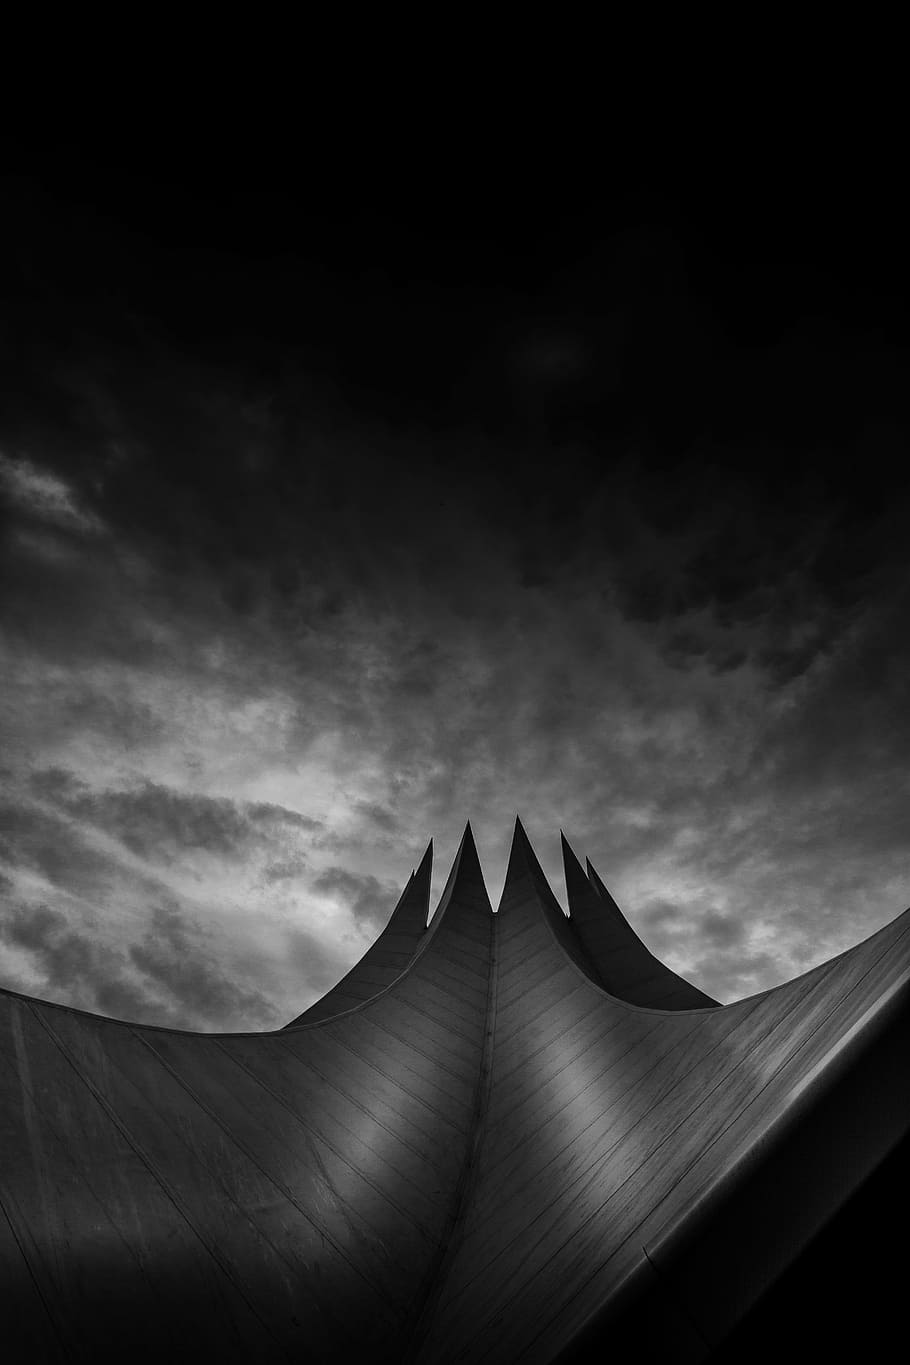 ant view, building, cloudy, sky, architecture, infrastructure, cloud, black and white, roof, night